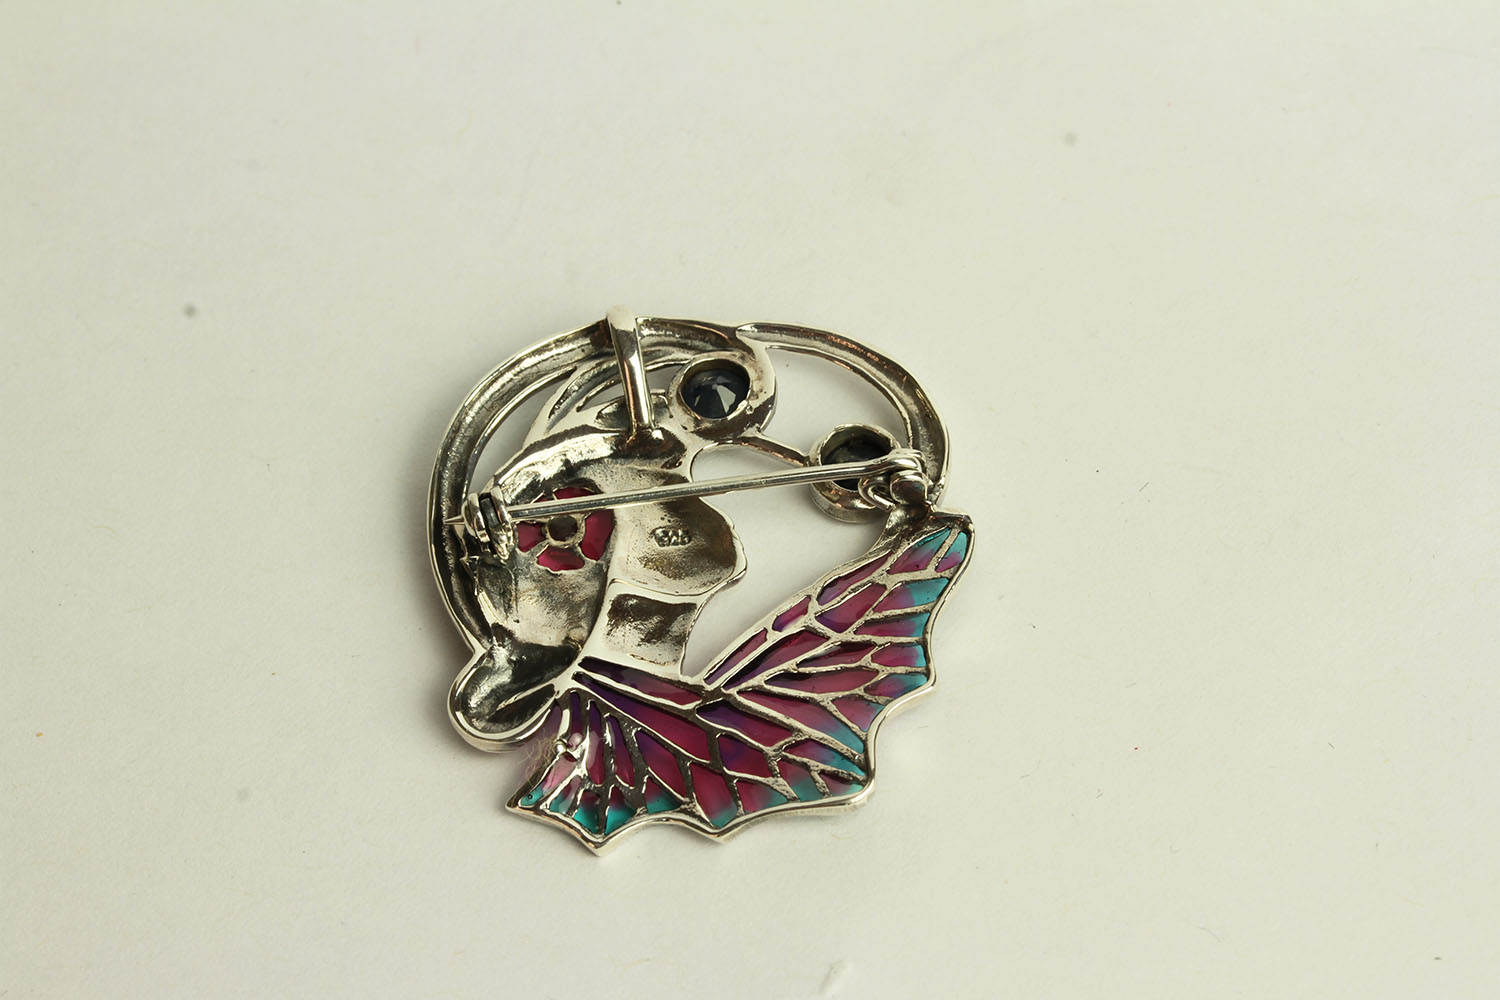 Floral Lady Brooch Pendant, set with 2 sapphires and a ruby - Image 2 of 2